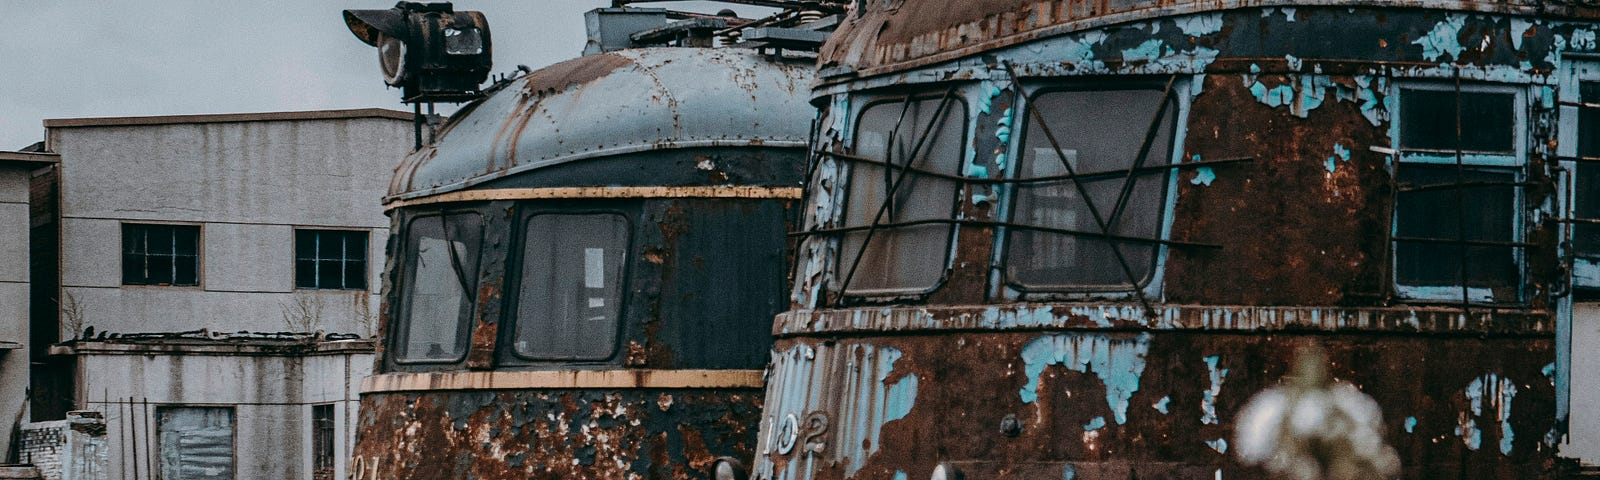 Old and rusty commuter trains stand in an abandoned depot.